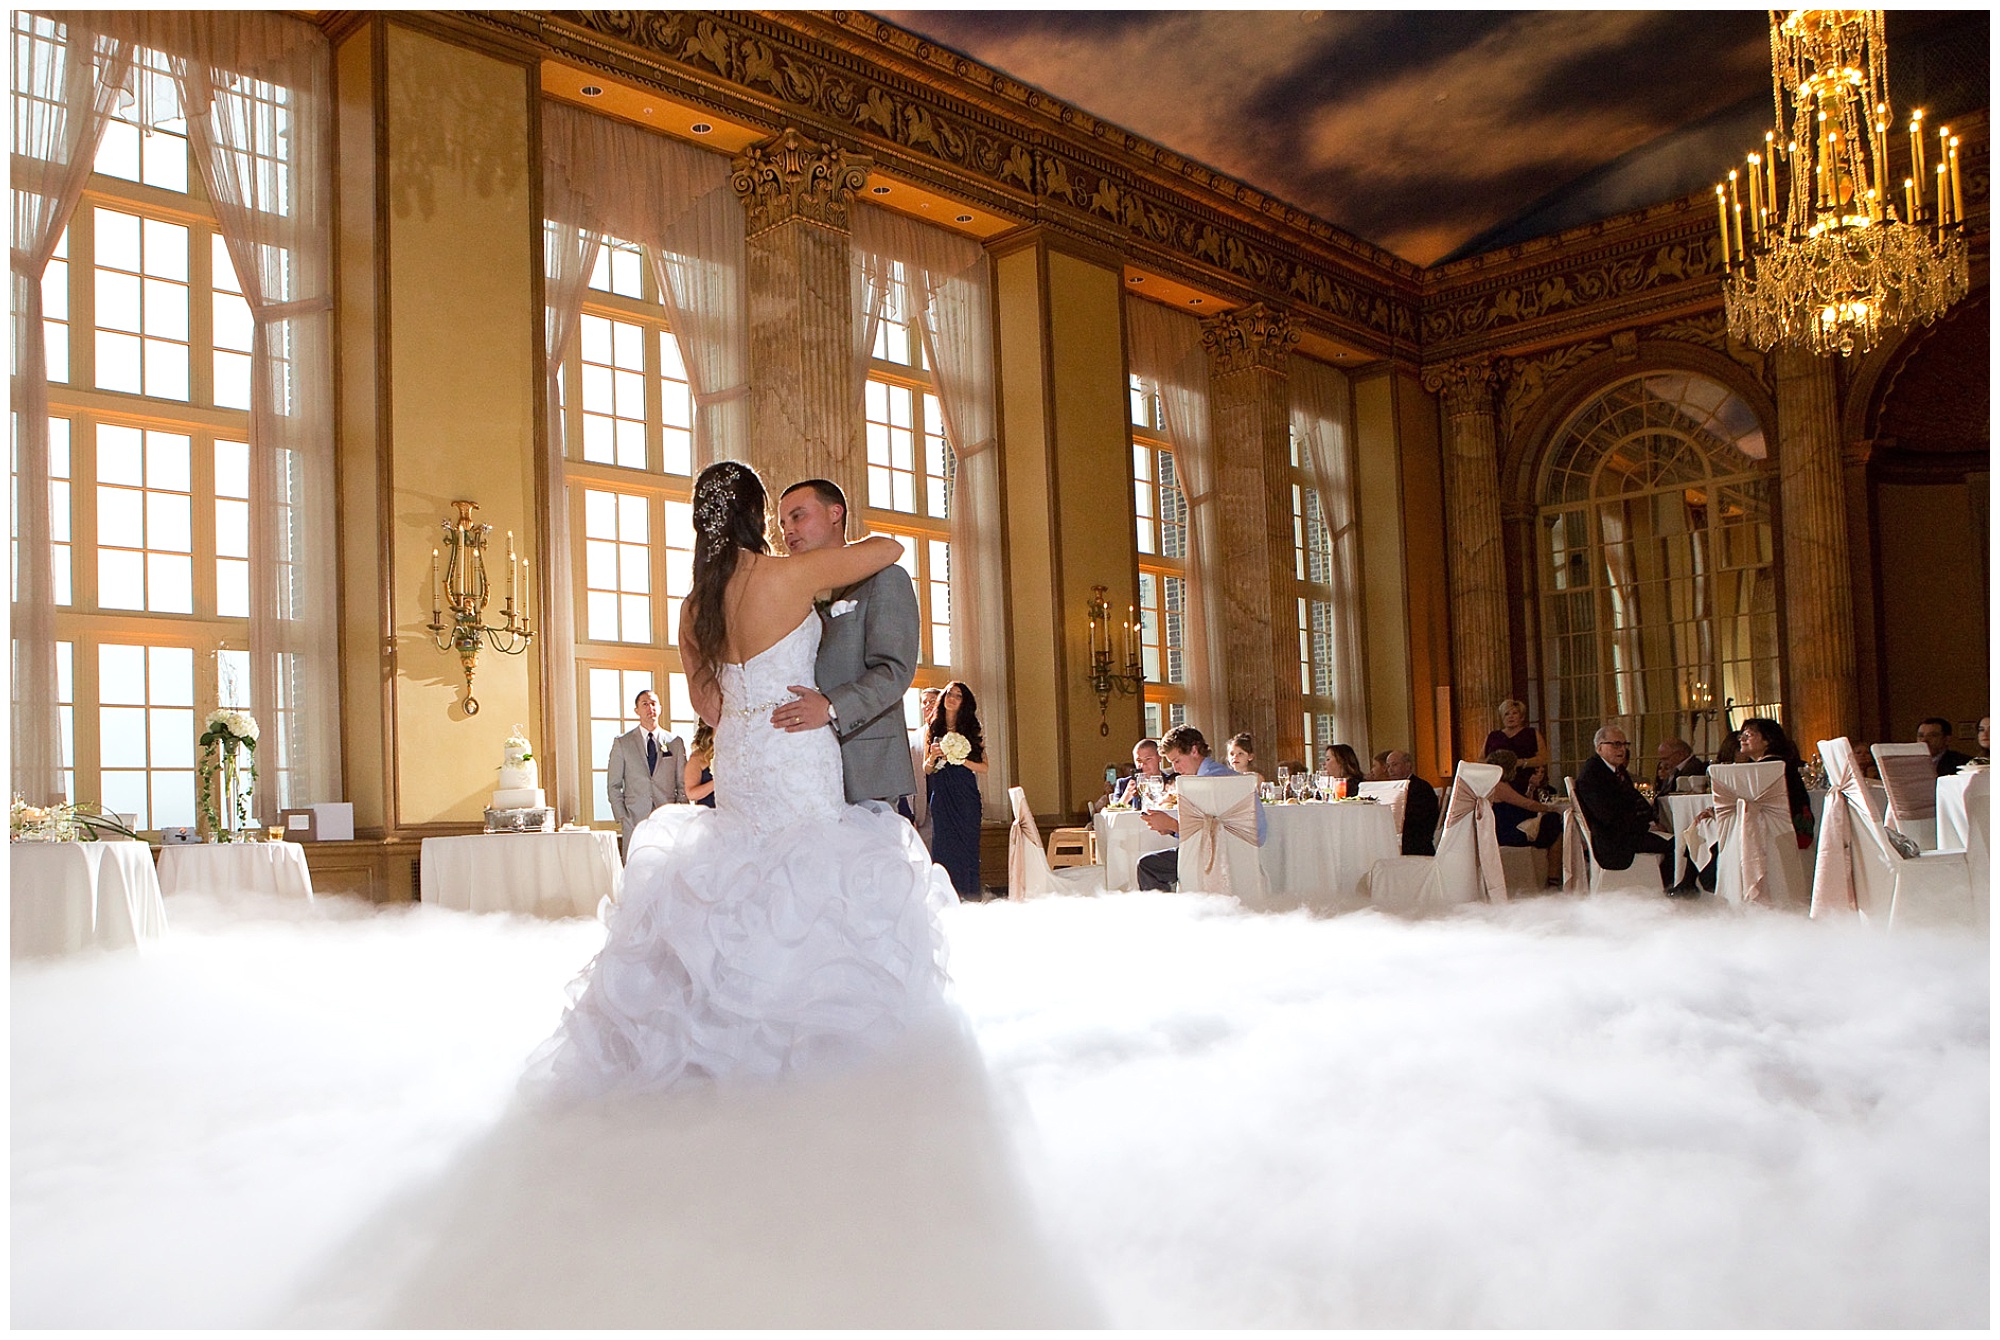 Photo of a bride and groom during their first dance as a dry ice cloud generator spills out a thick blanket of cloud over the dance floor.